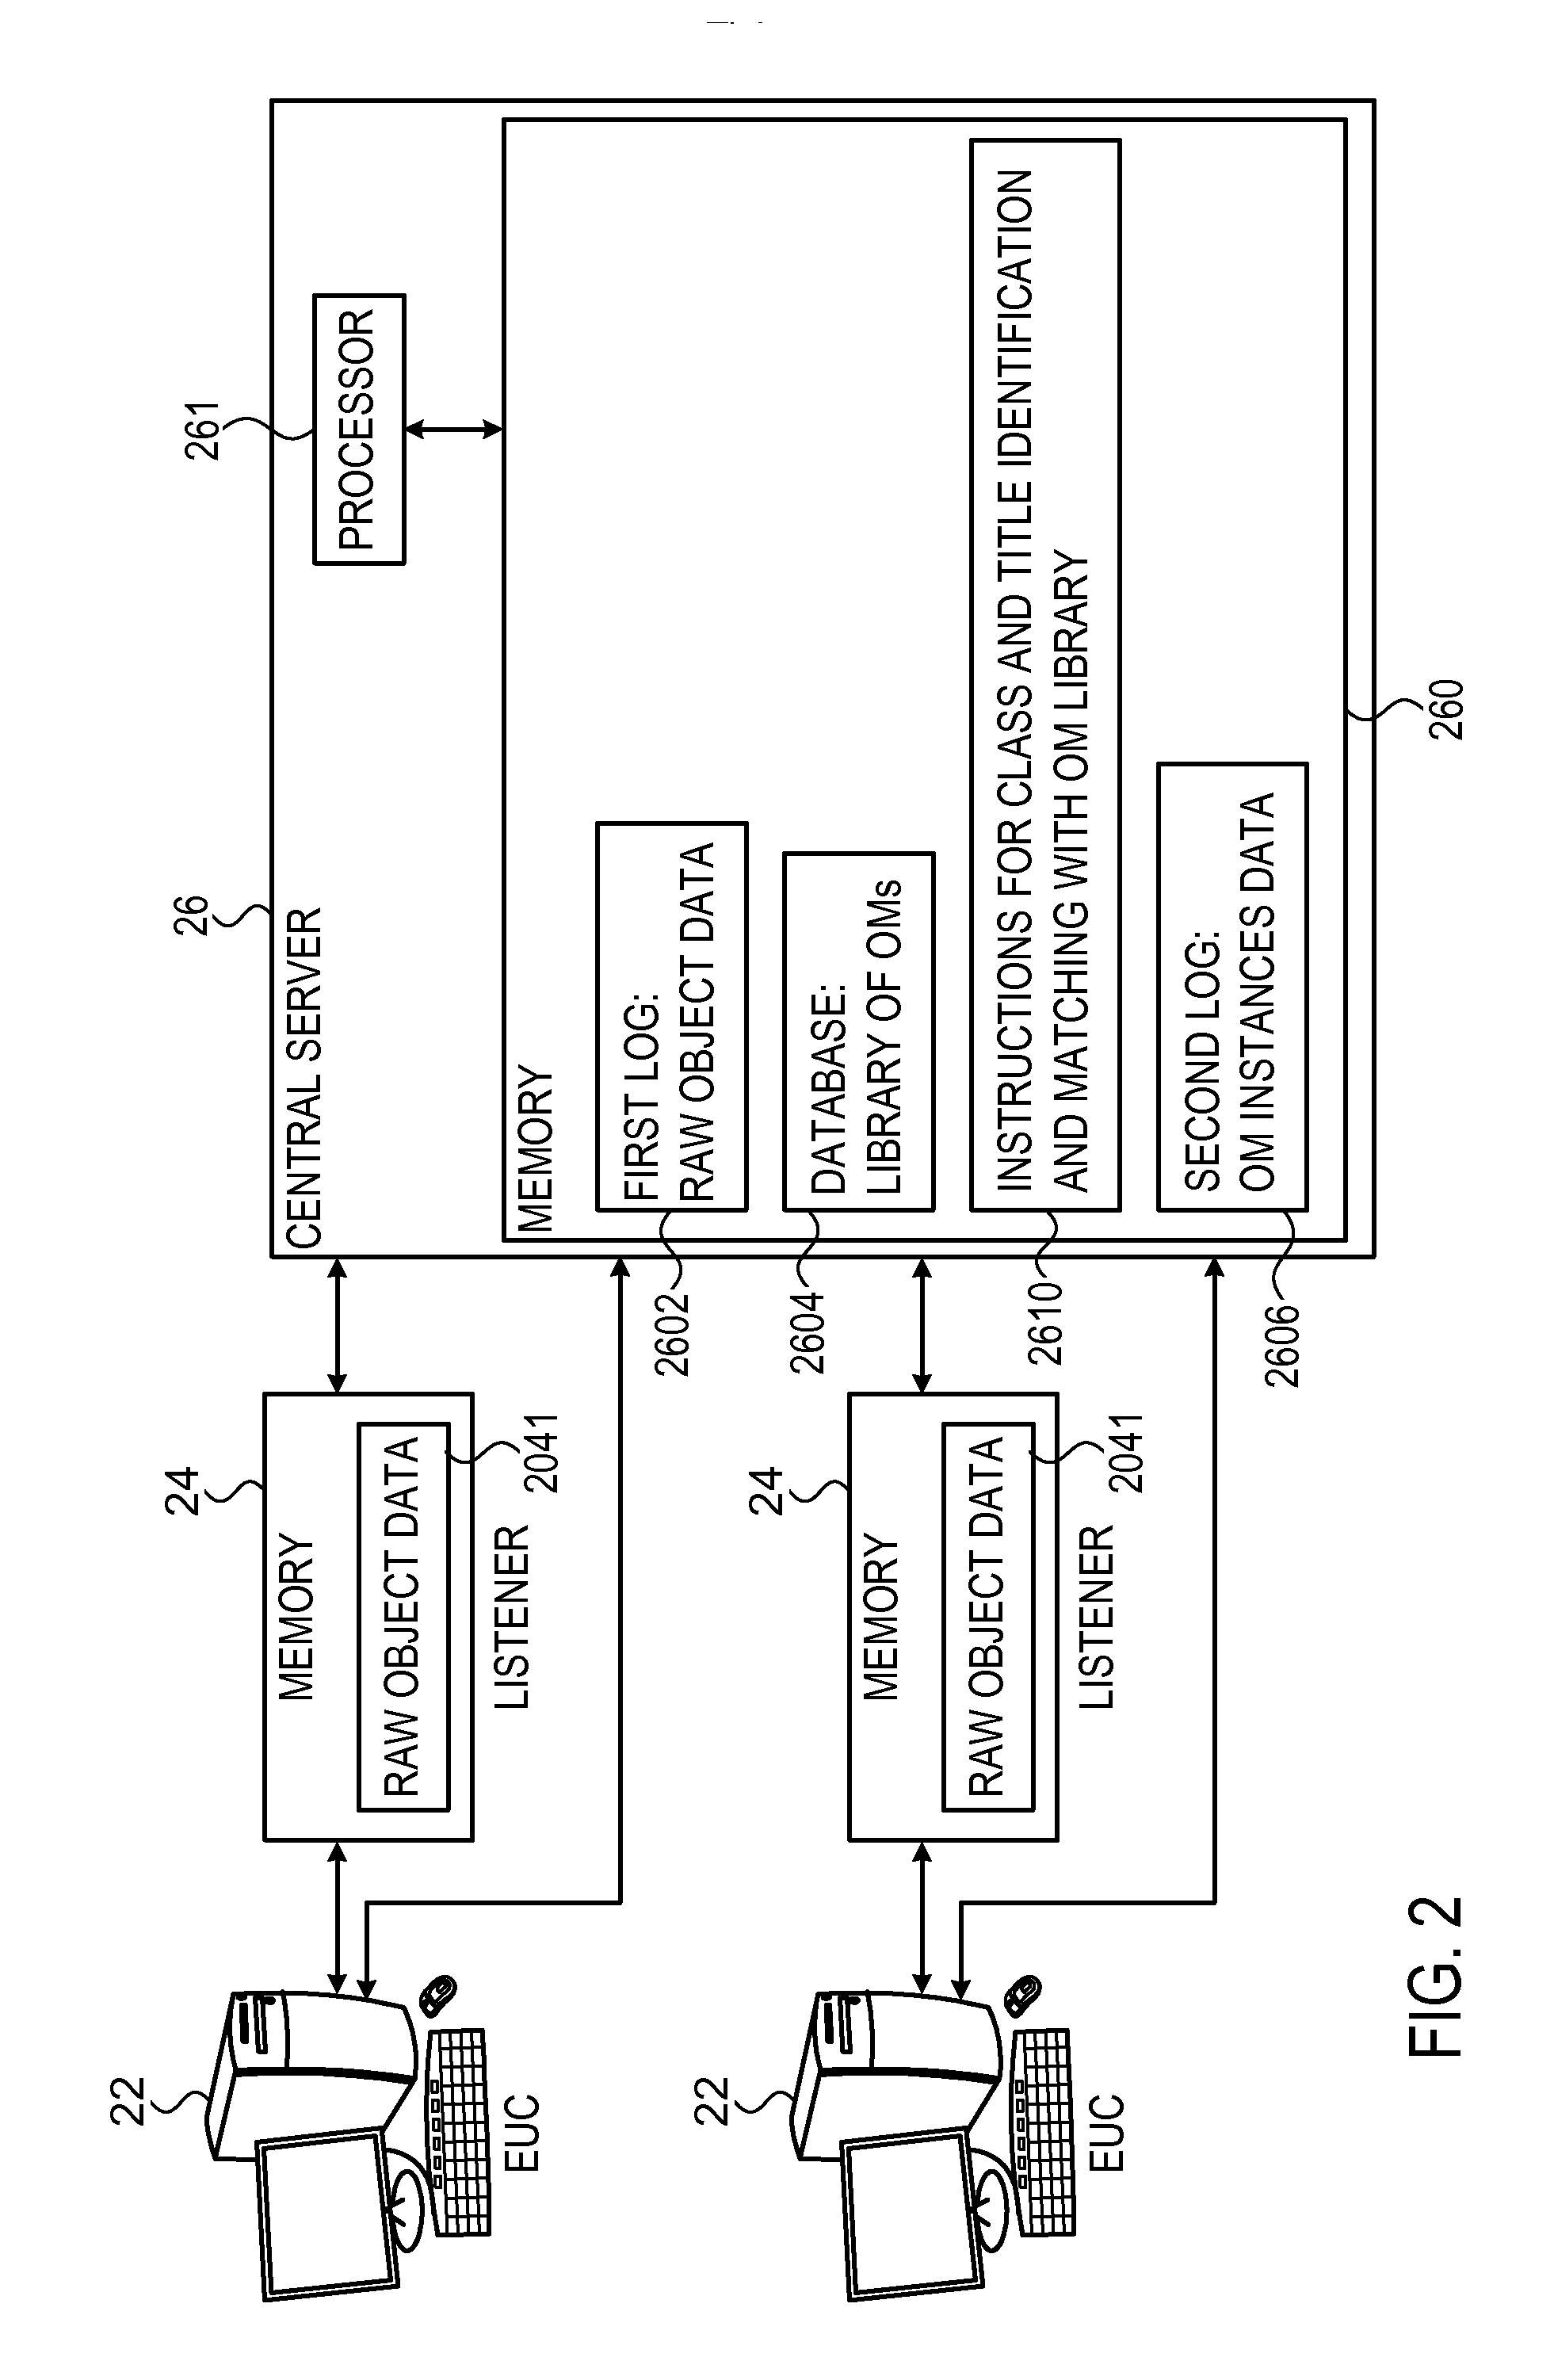 System for automated process mining